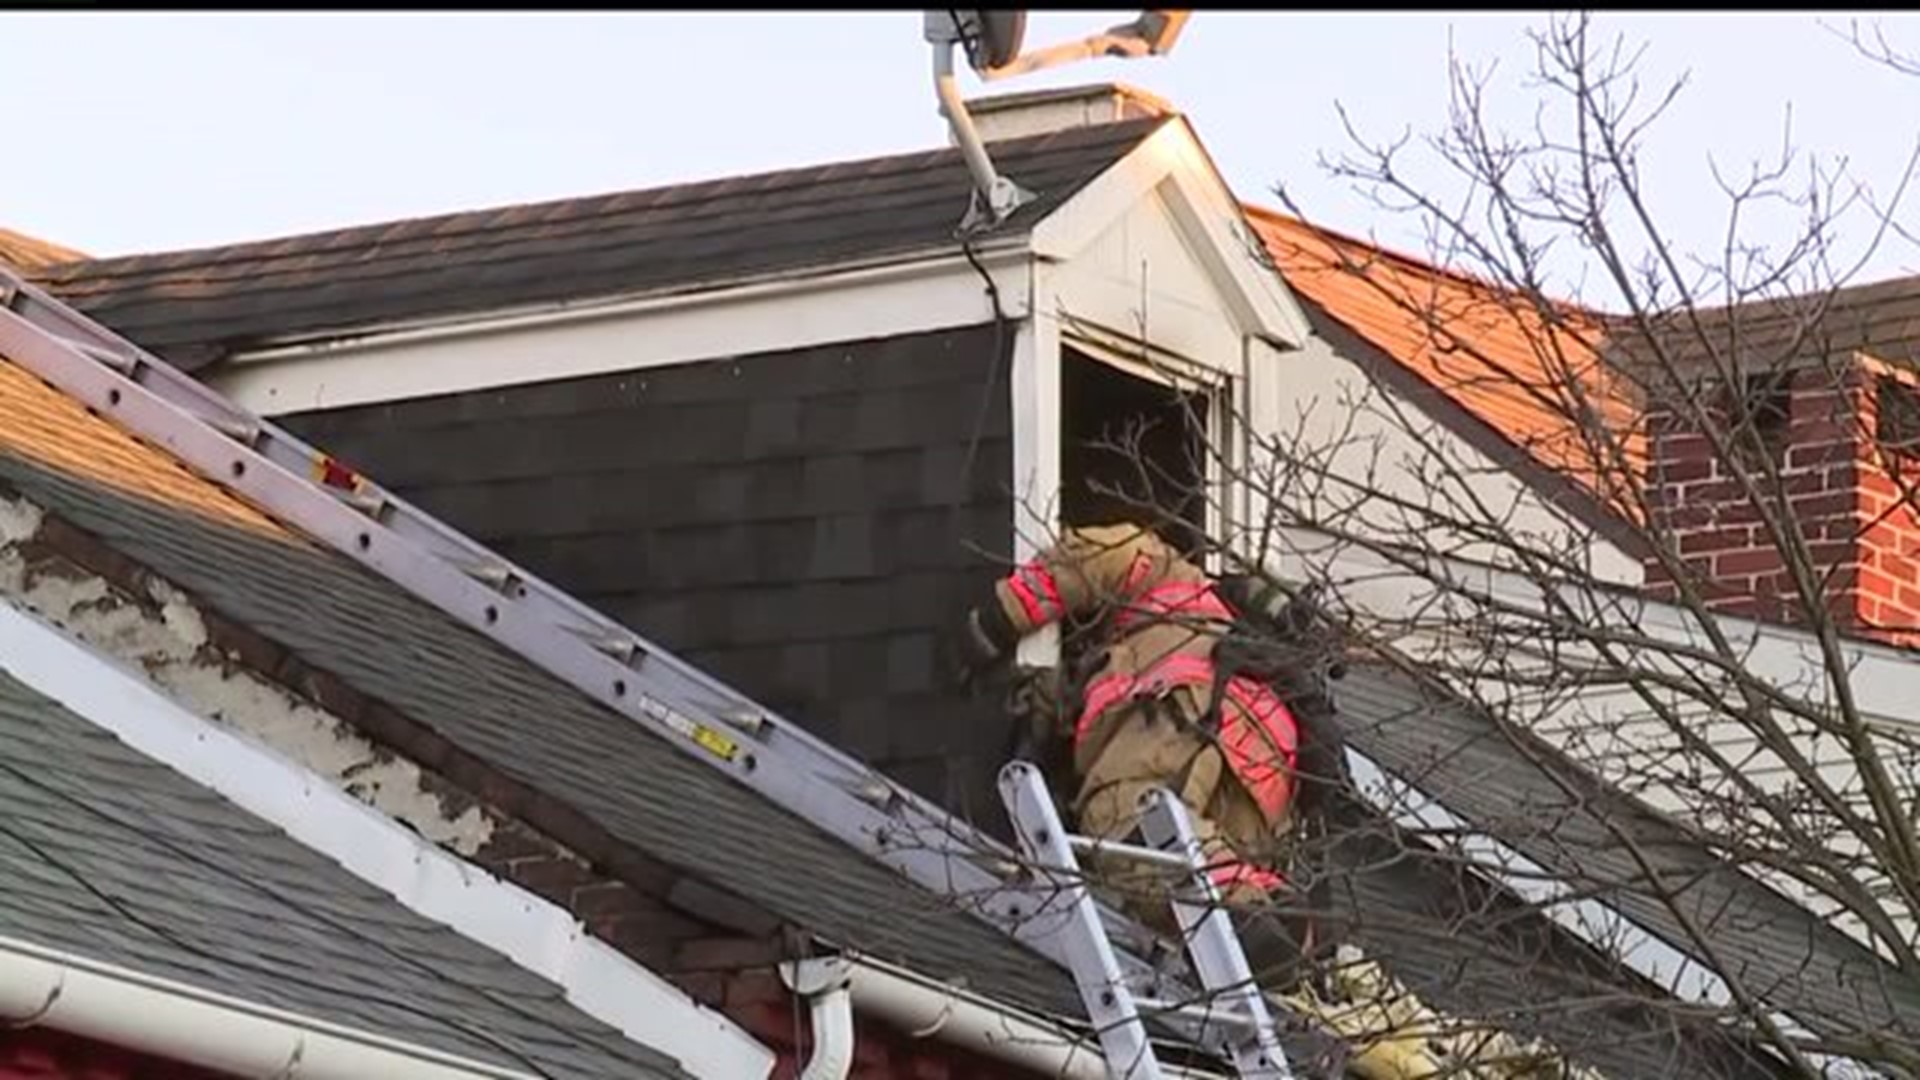 Crews called to house fire in Lancaster